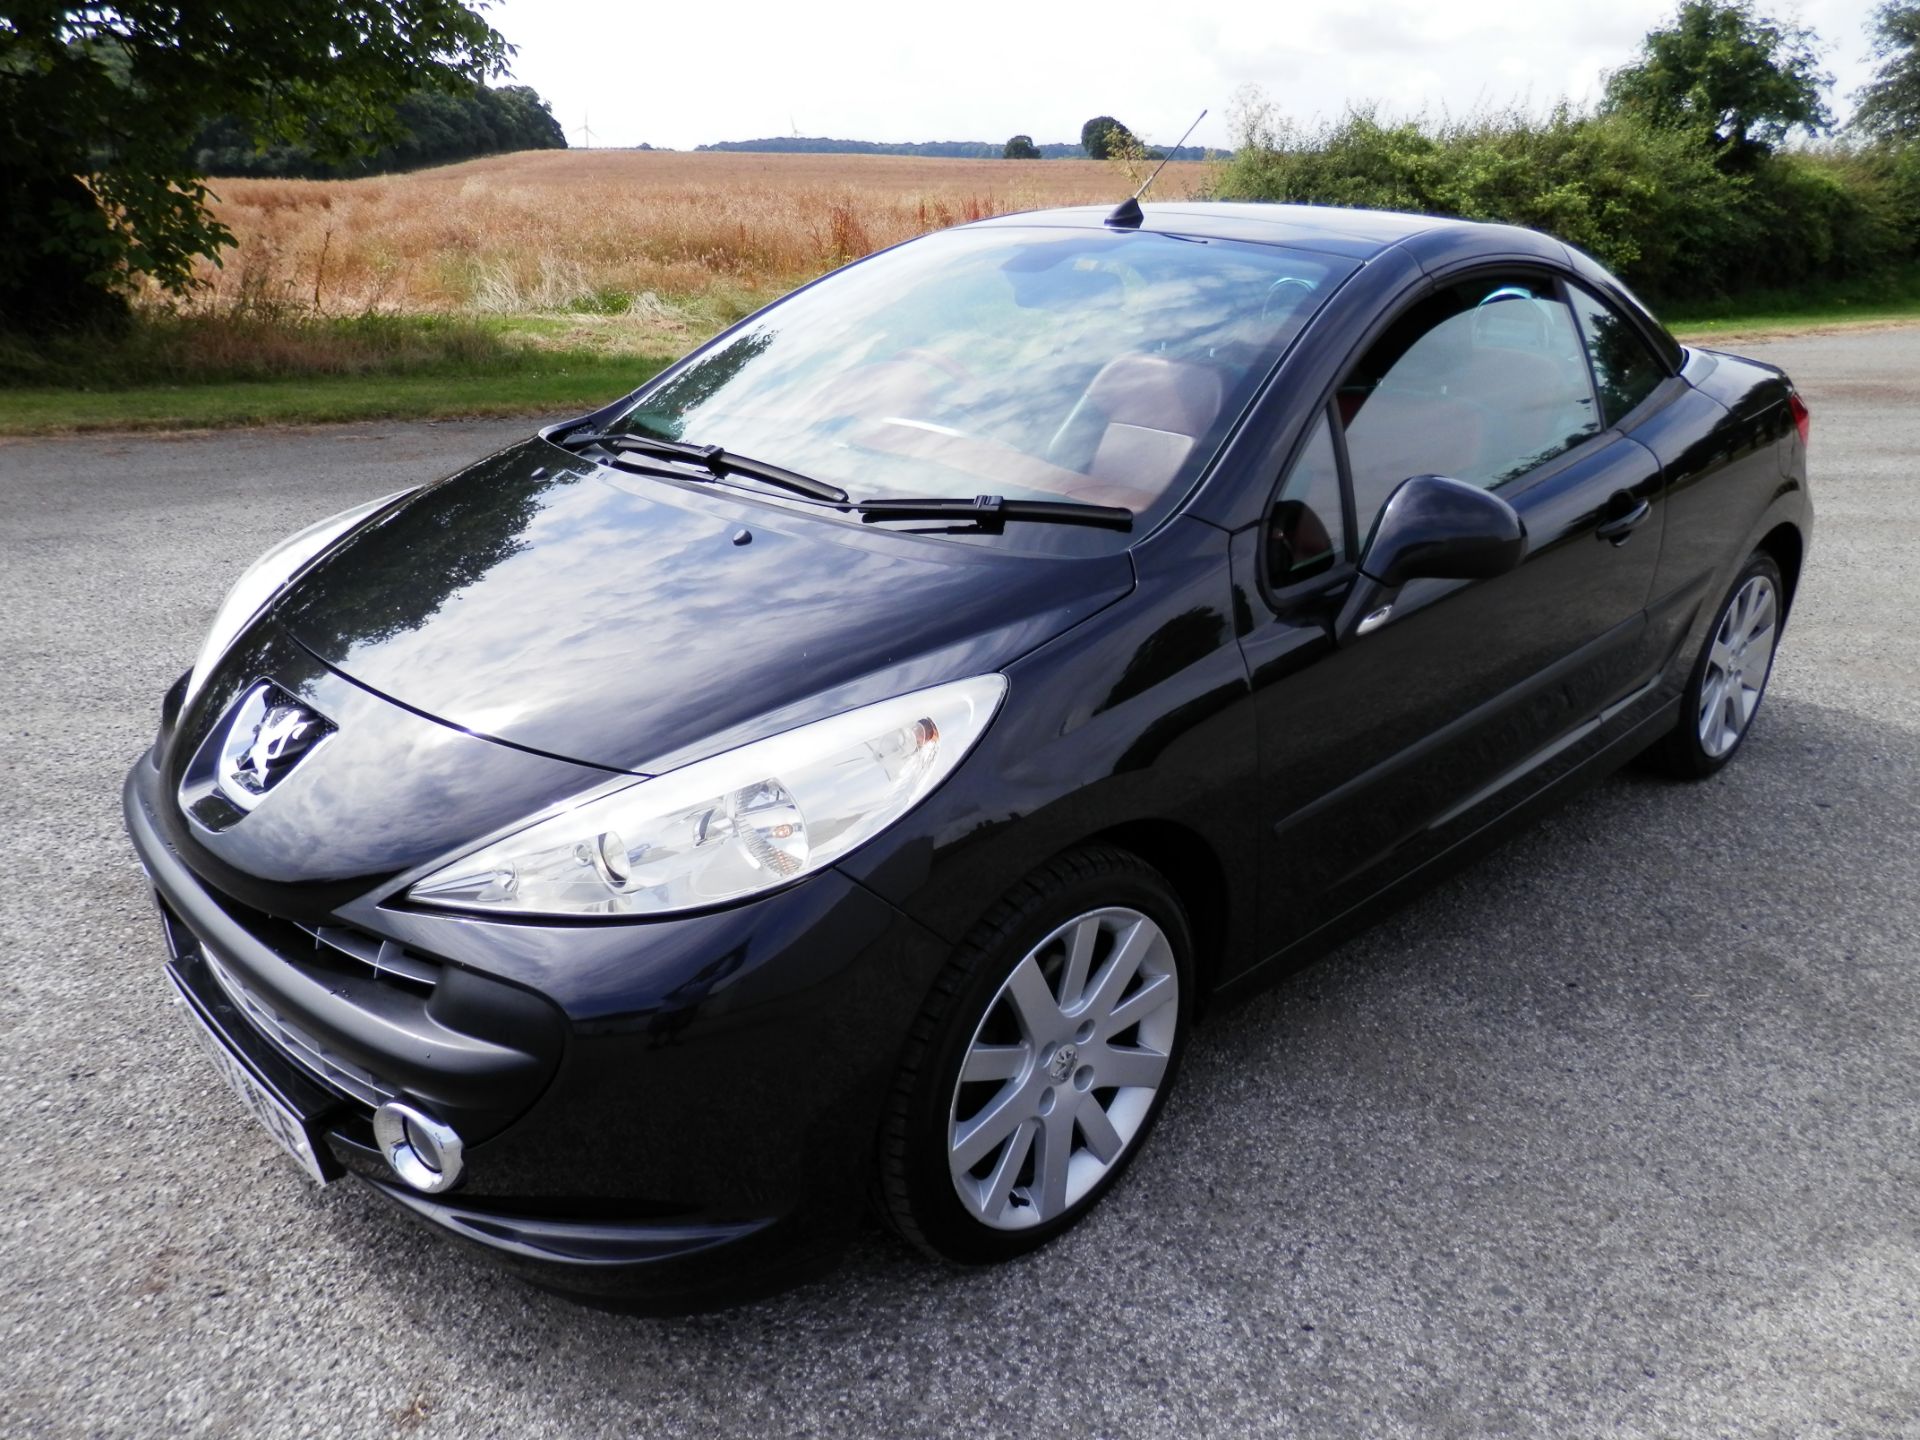 2007/07 PEUGEOT 207 COUPE CABRIOLET - 1.6 16V GT THP 2dr, WITH 2 TONE BLACK & READ LEATHER INTERIOR. - Image 6 of 31